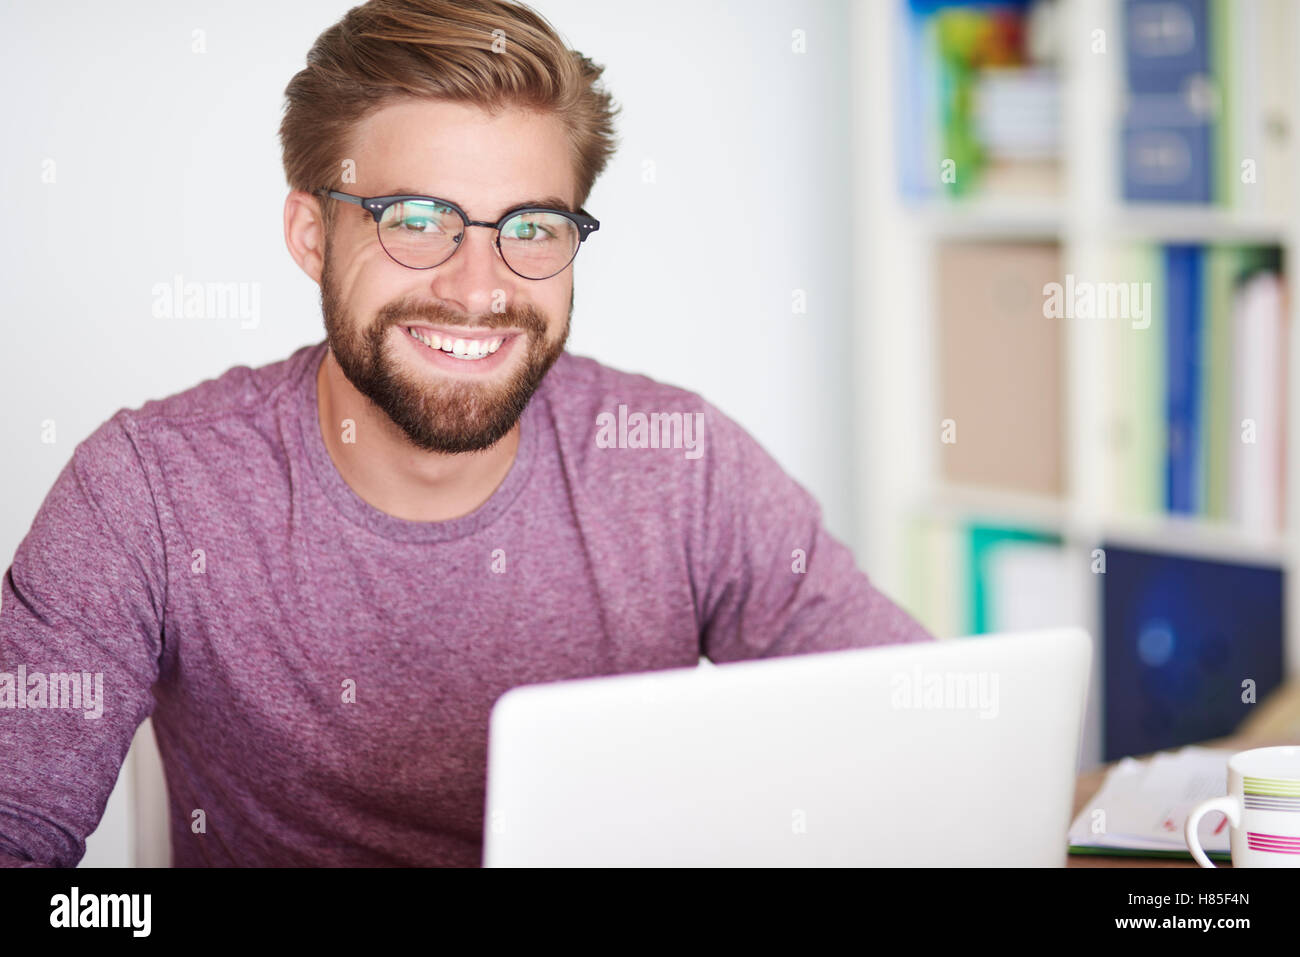 In good mood at work Stock Photo